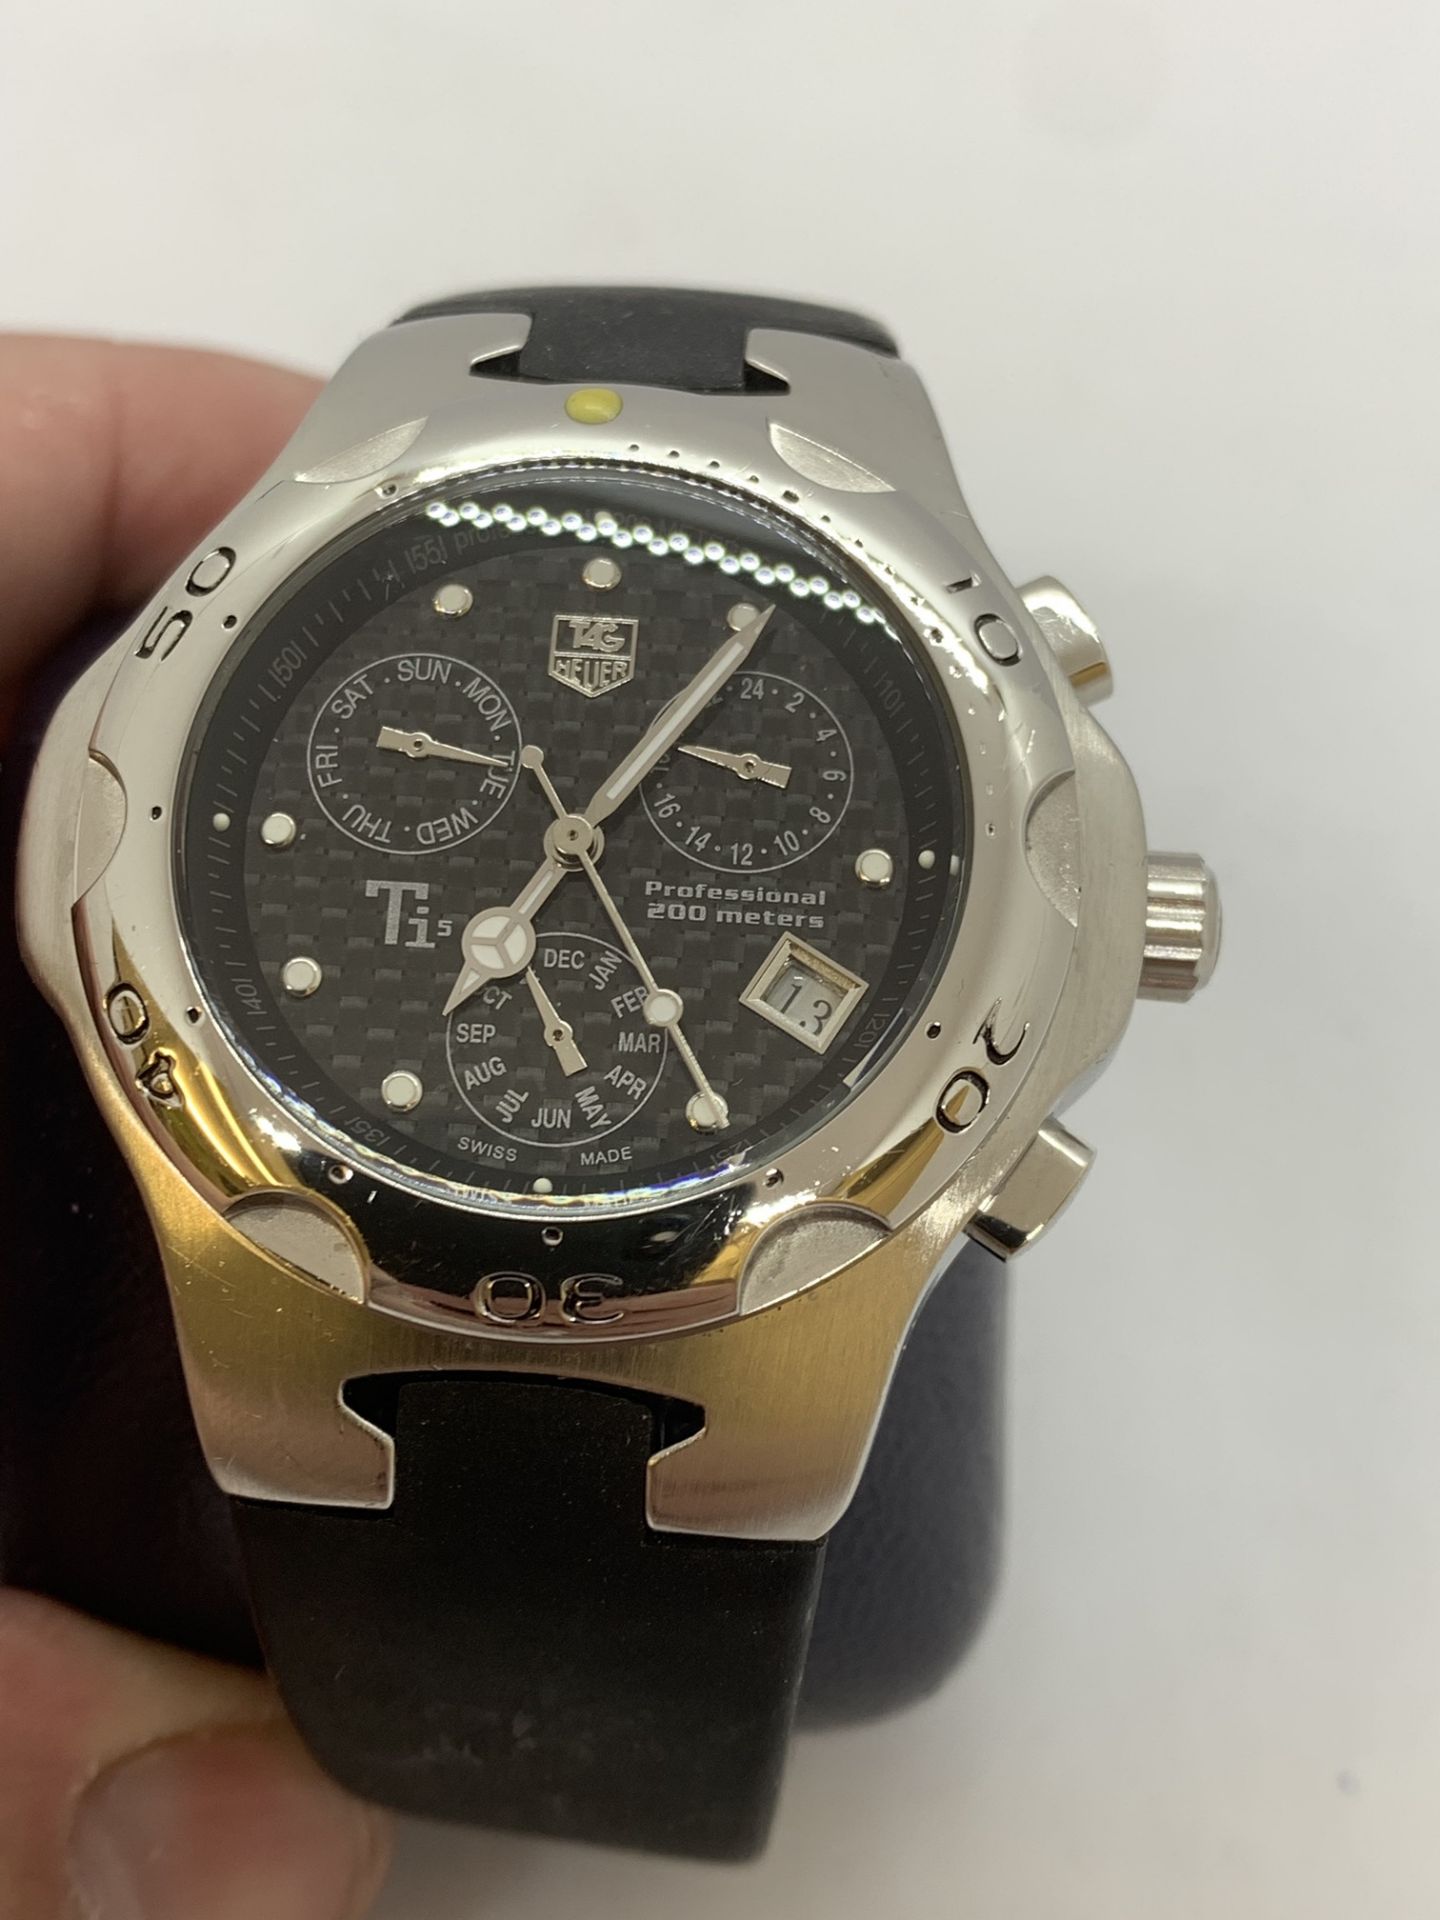 TAG HEUER PROFESSIONAL CHRONO AUTOMATIC WATCH - 200 METERS - Image 3 of 11